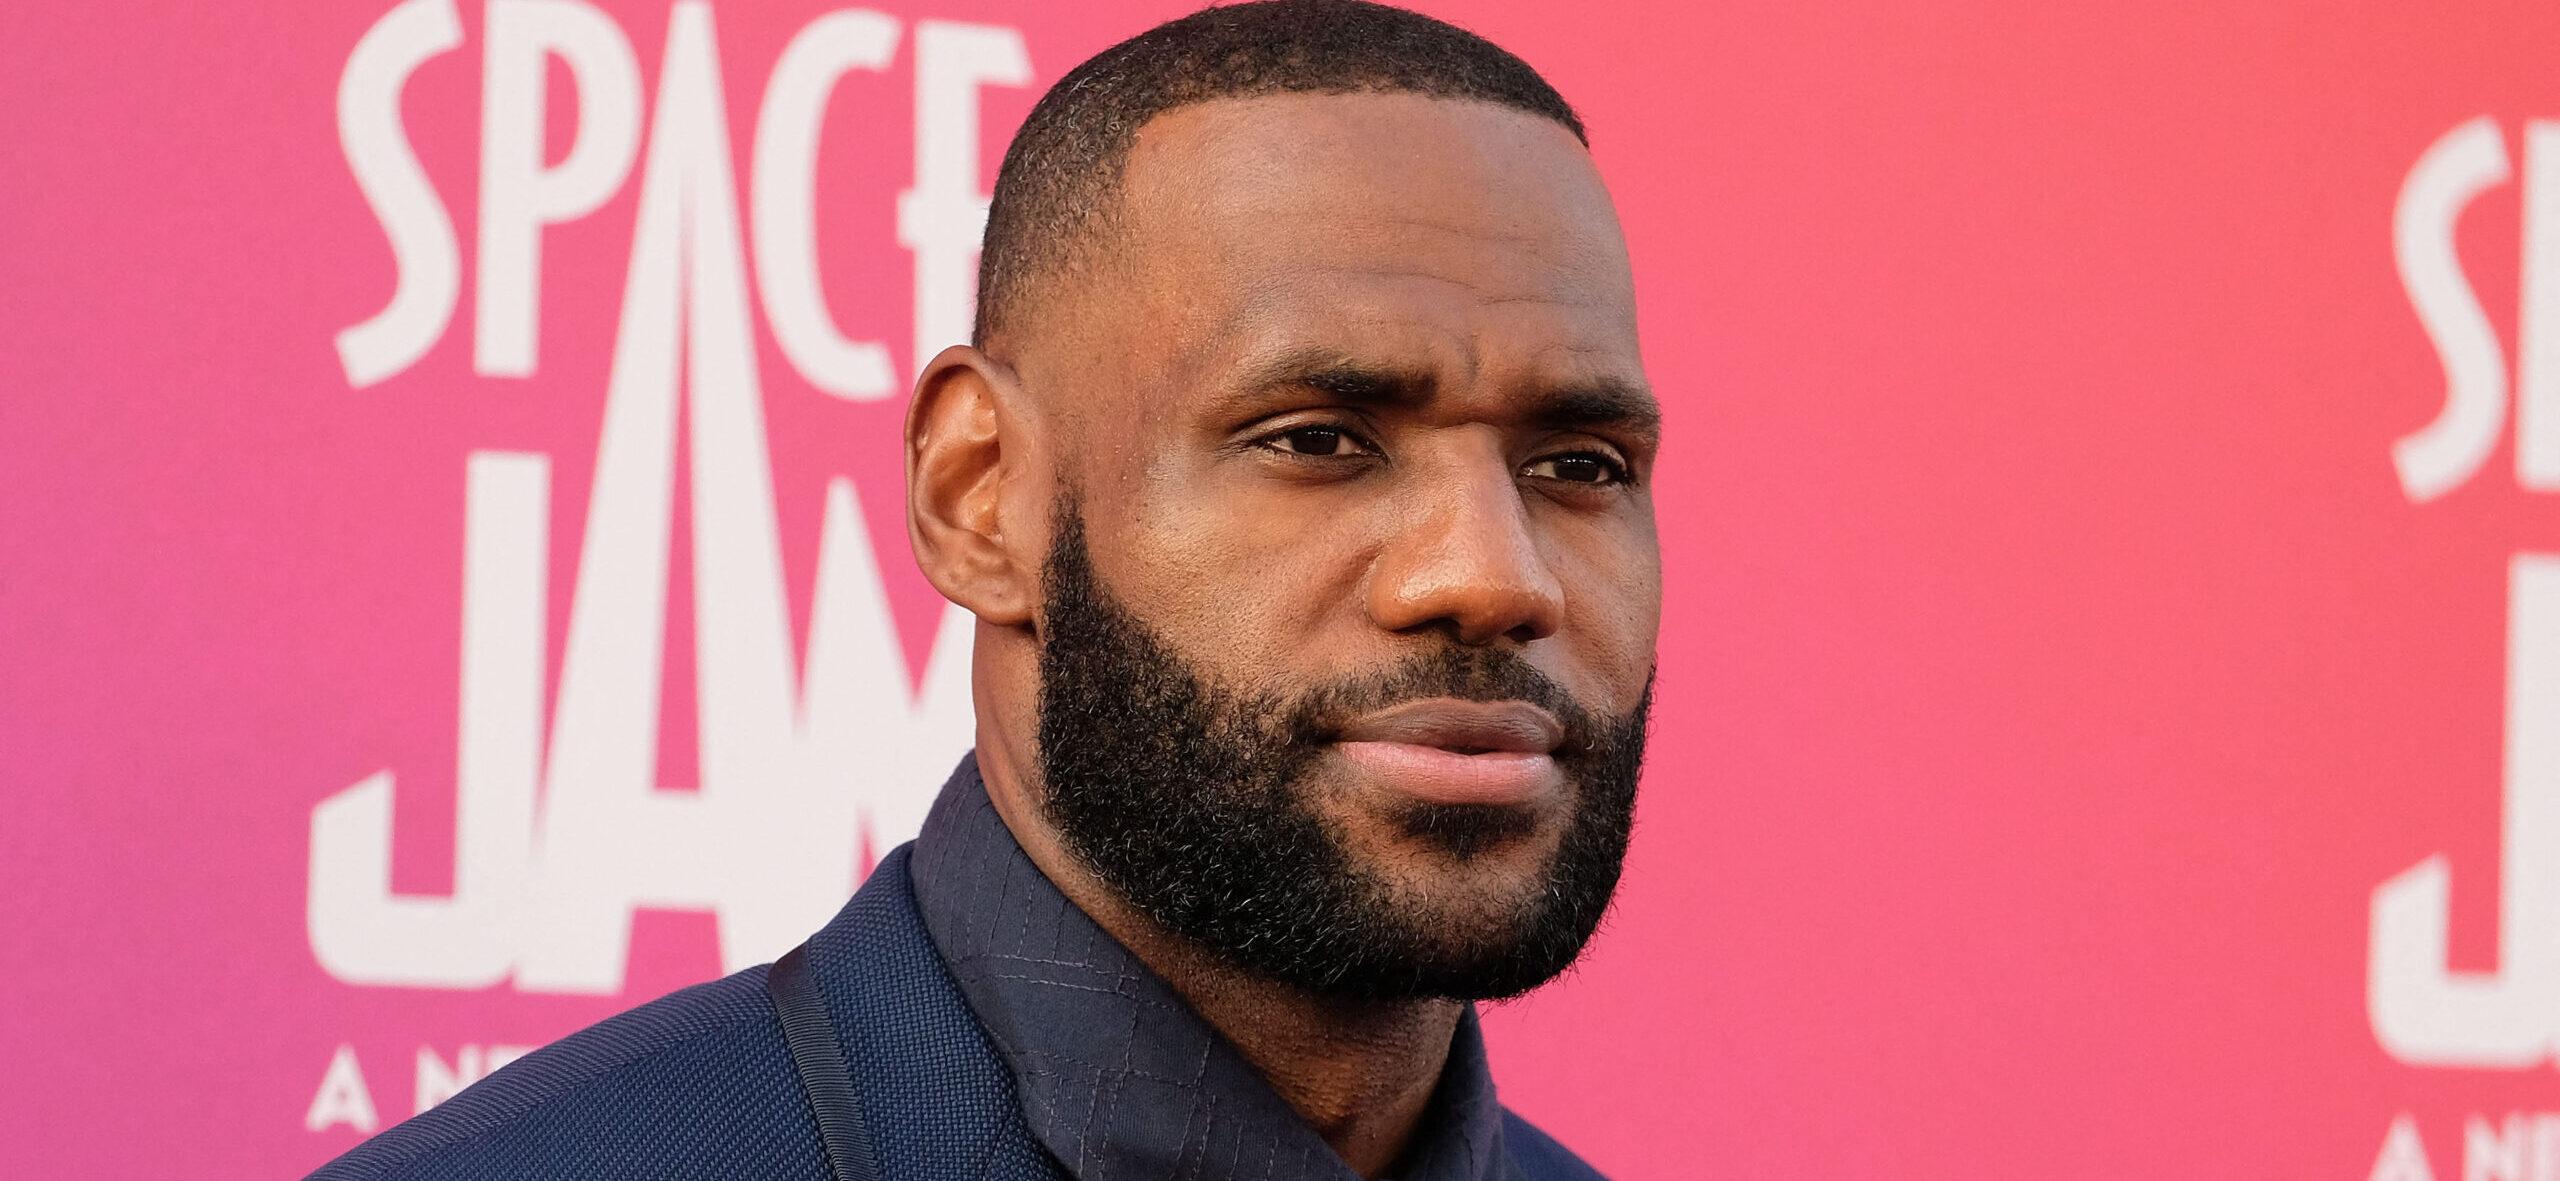 LeBron James at Space Jam A New Legacy Premiere - Los Angeles